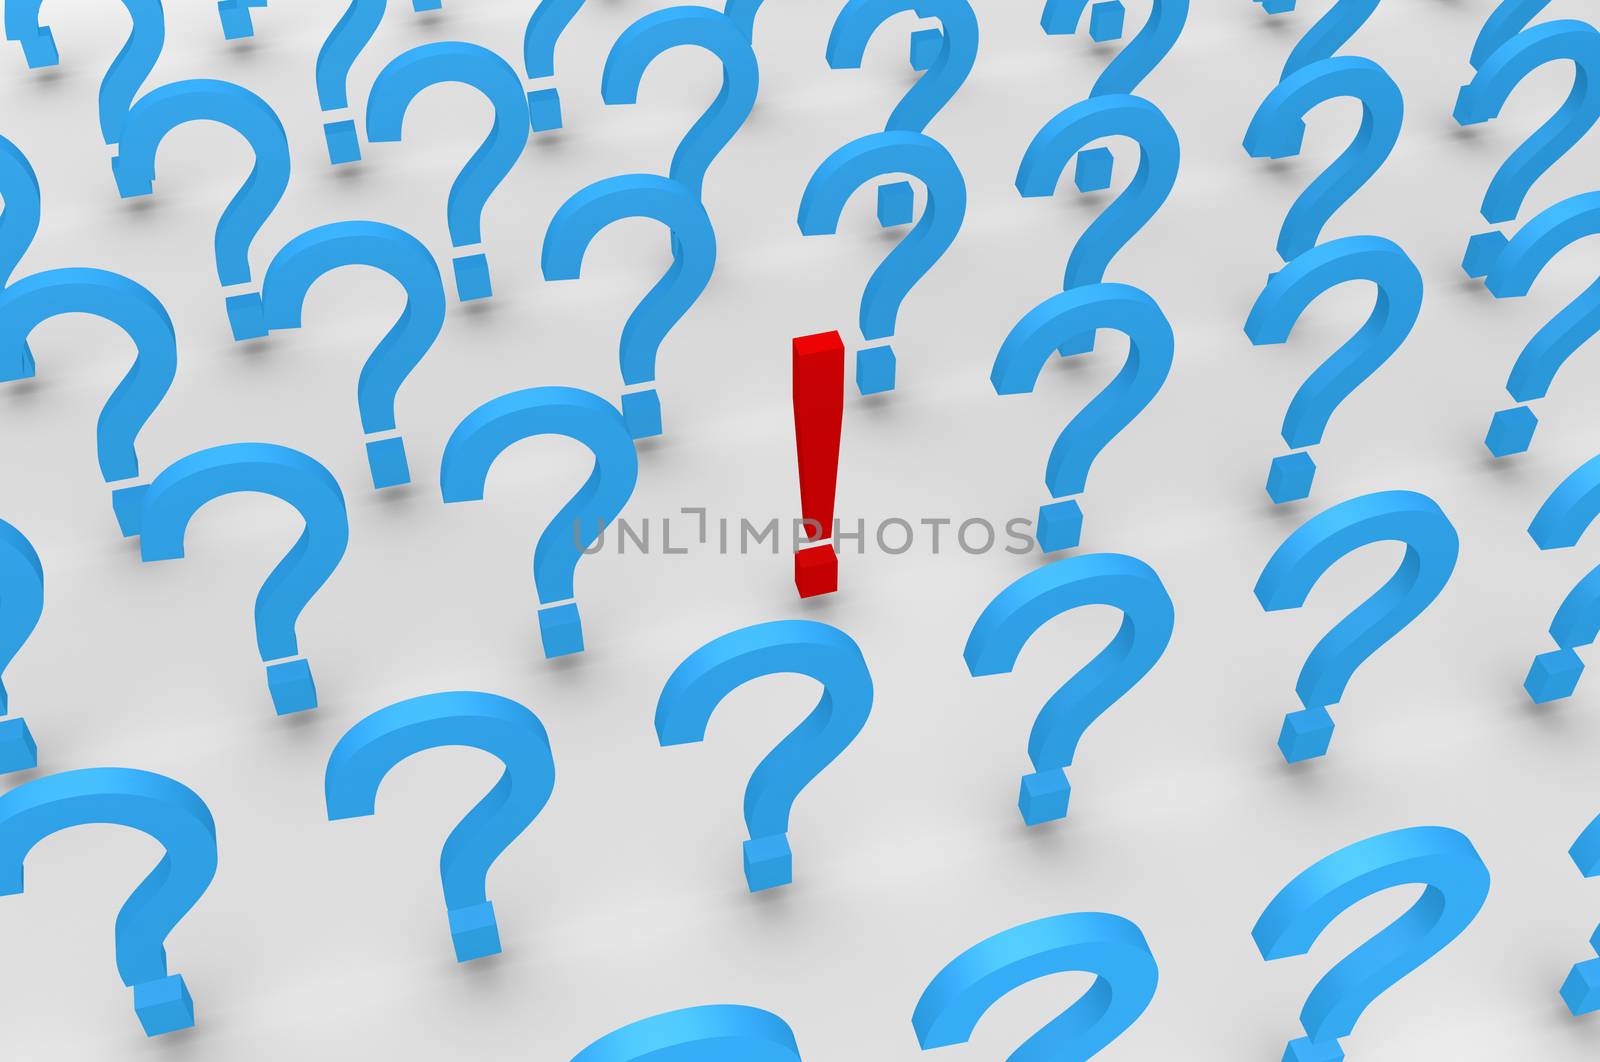 Many 3d question mark symbols and one exclamation mark